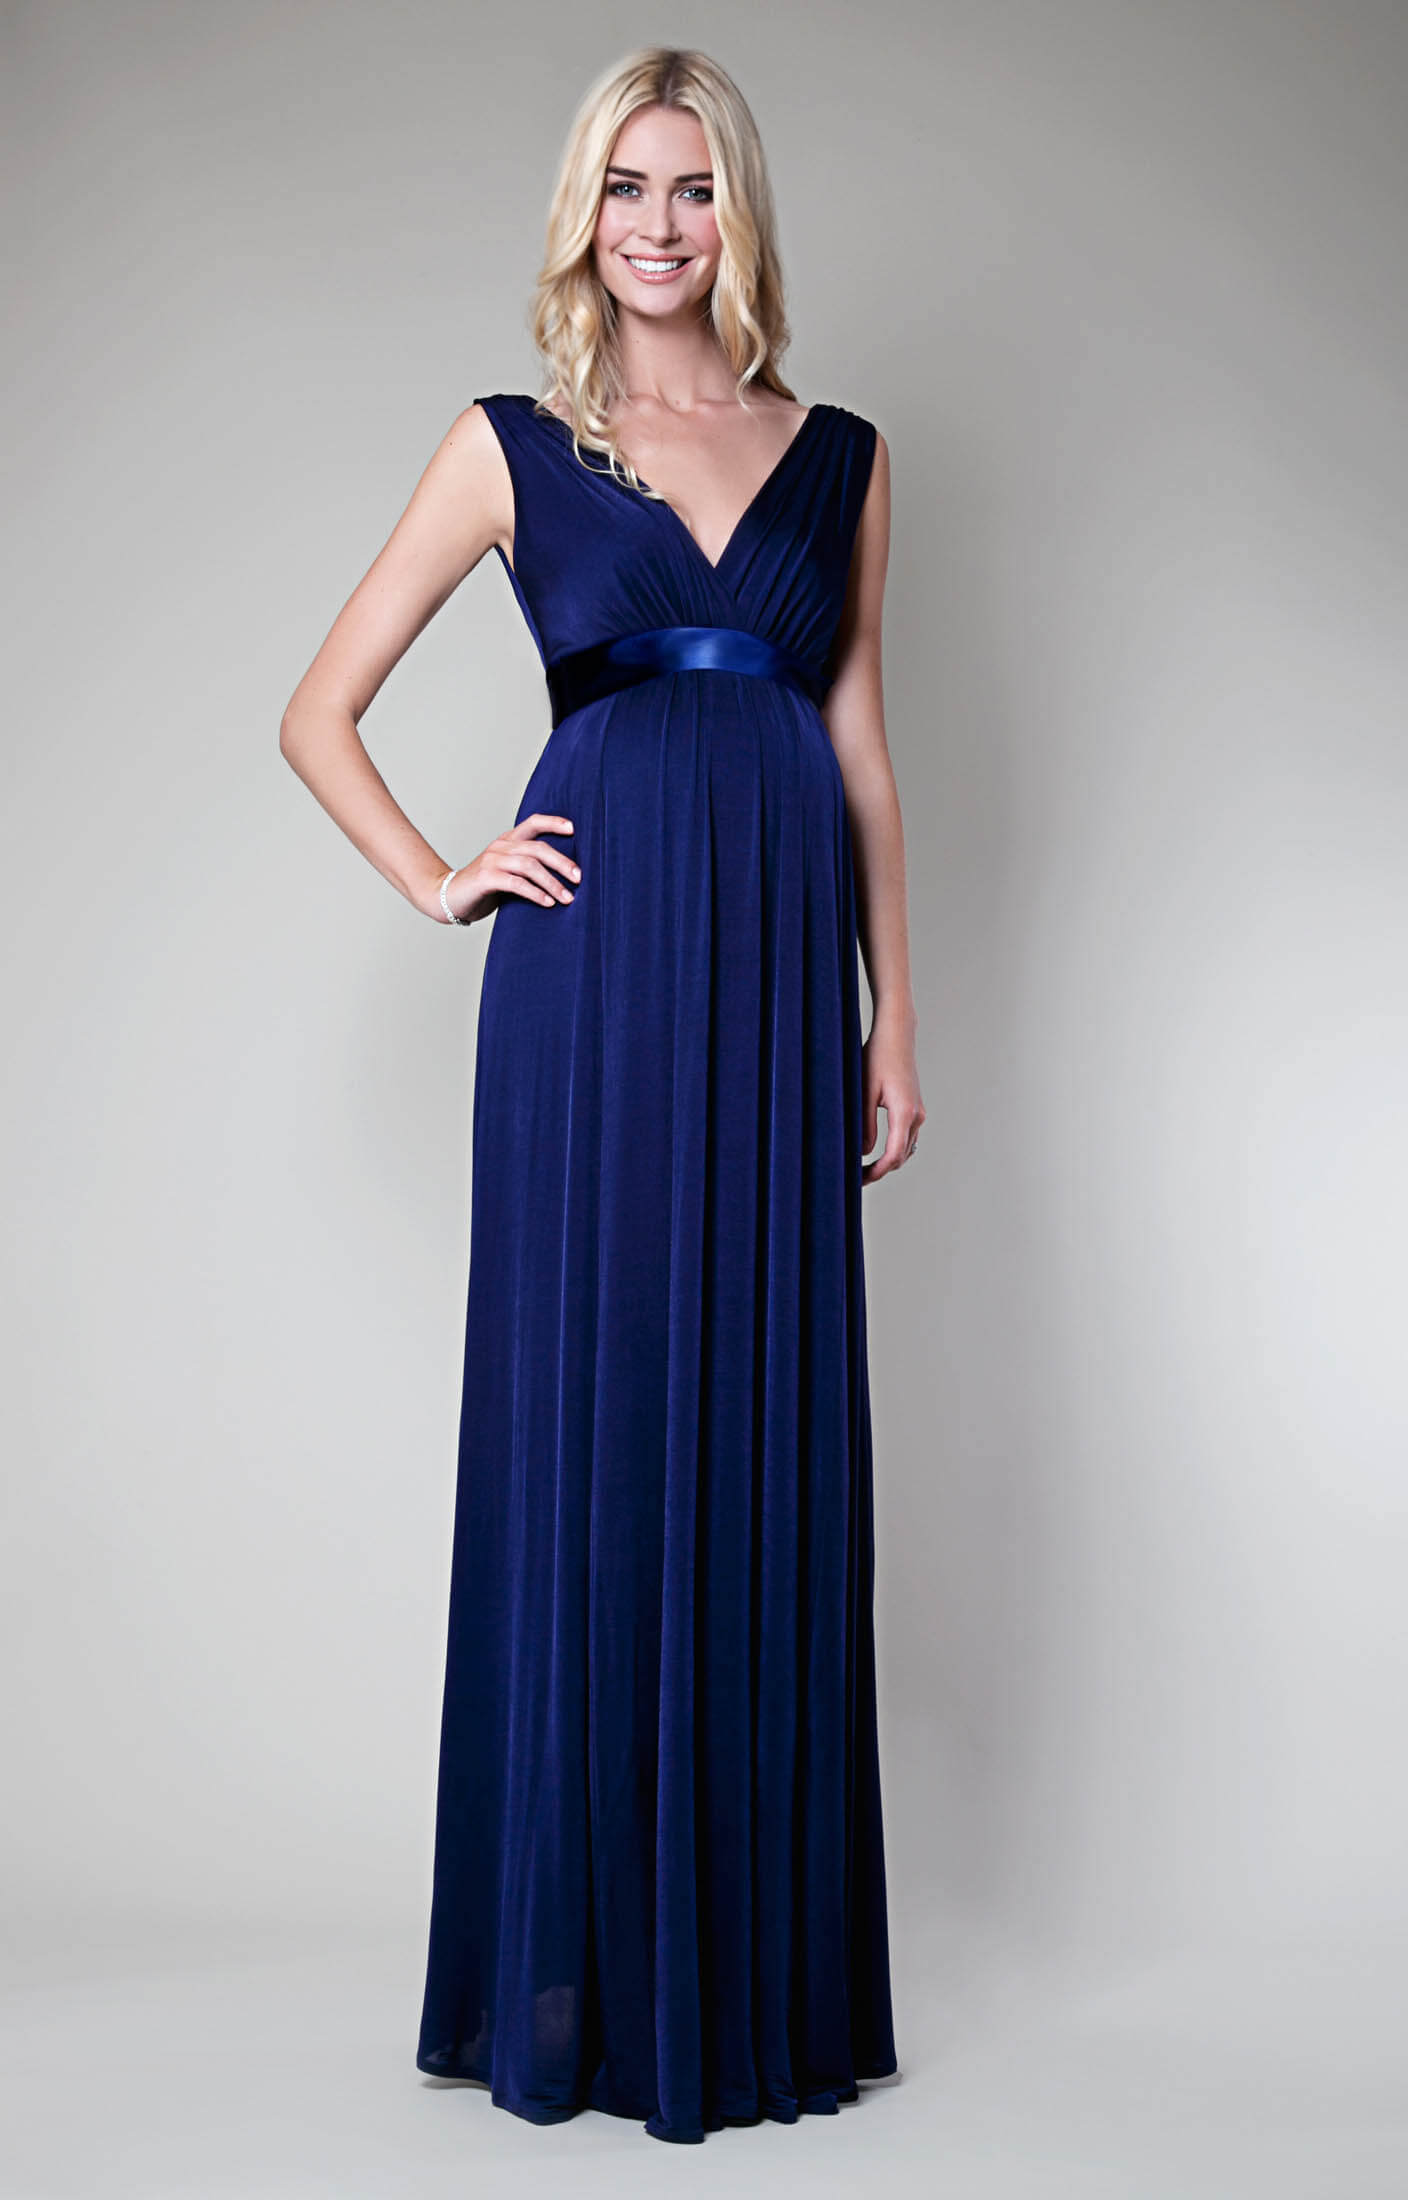 Anastasia Maternity Gown Eclipse Blue Clothes Wear Wedding by Party US Dresses, - Maternity Rose and Evening Tiffany